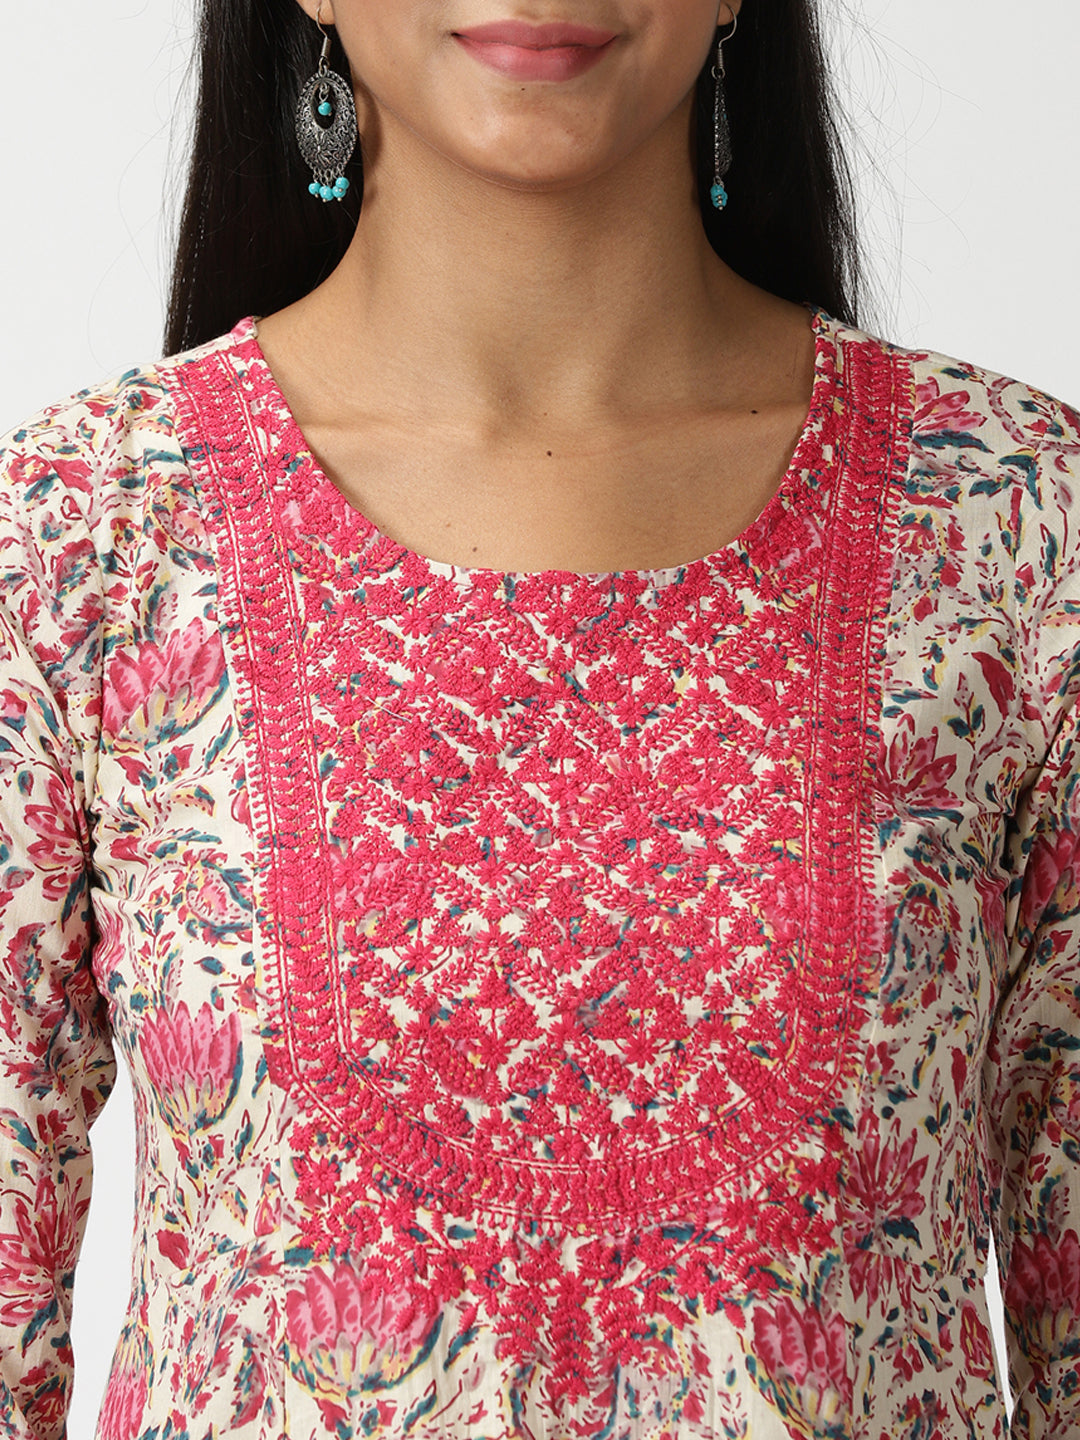 Pink Floral Printed Cotton Kurta with Yoke Embroidery